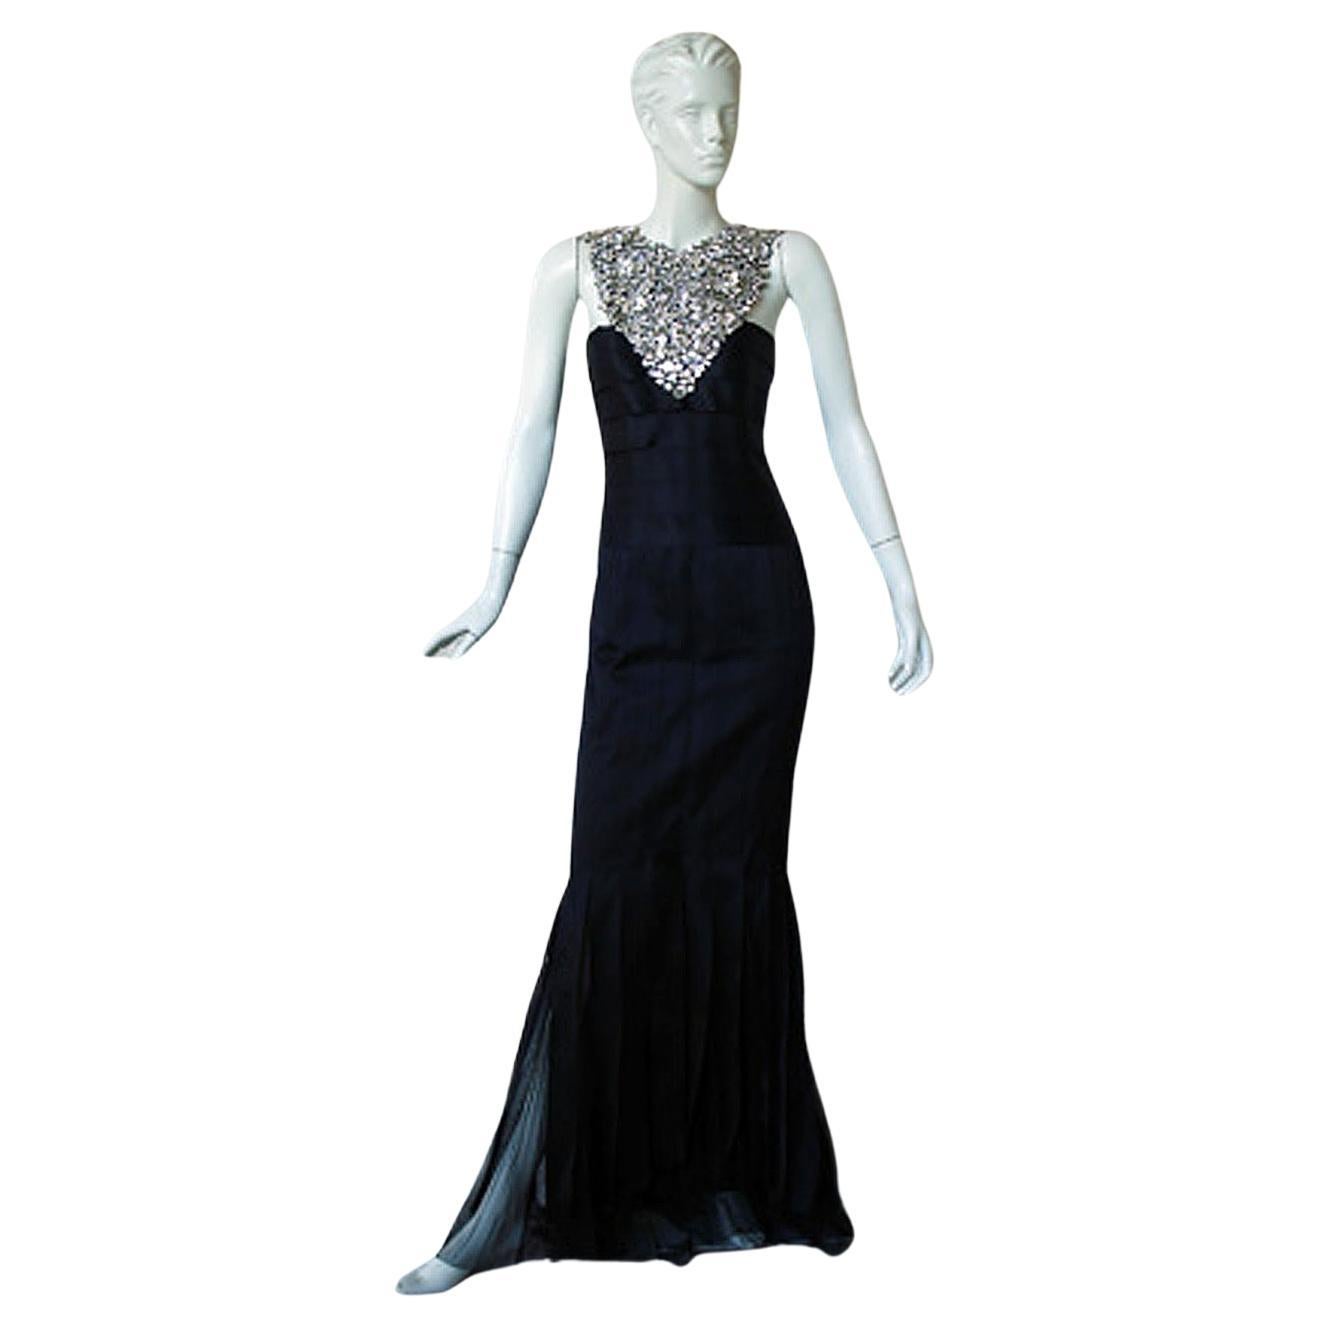  Chanel Runway "Finale" Jeweled Car Wash Gown from Lagerfeld's Golden Age For Sale